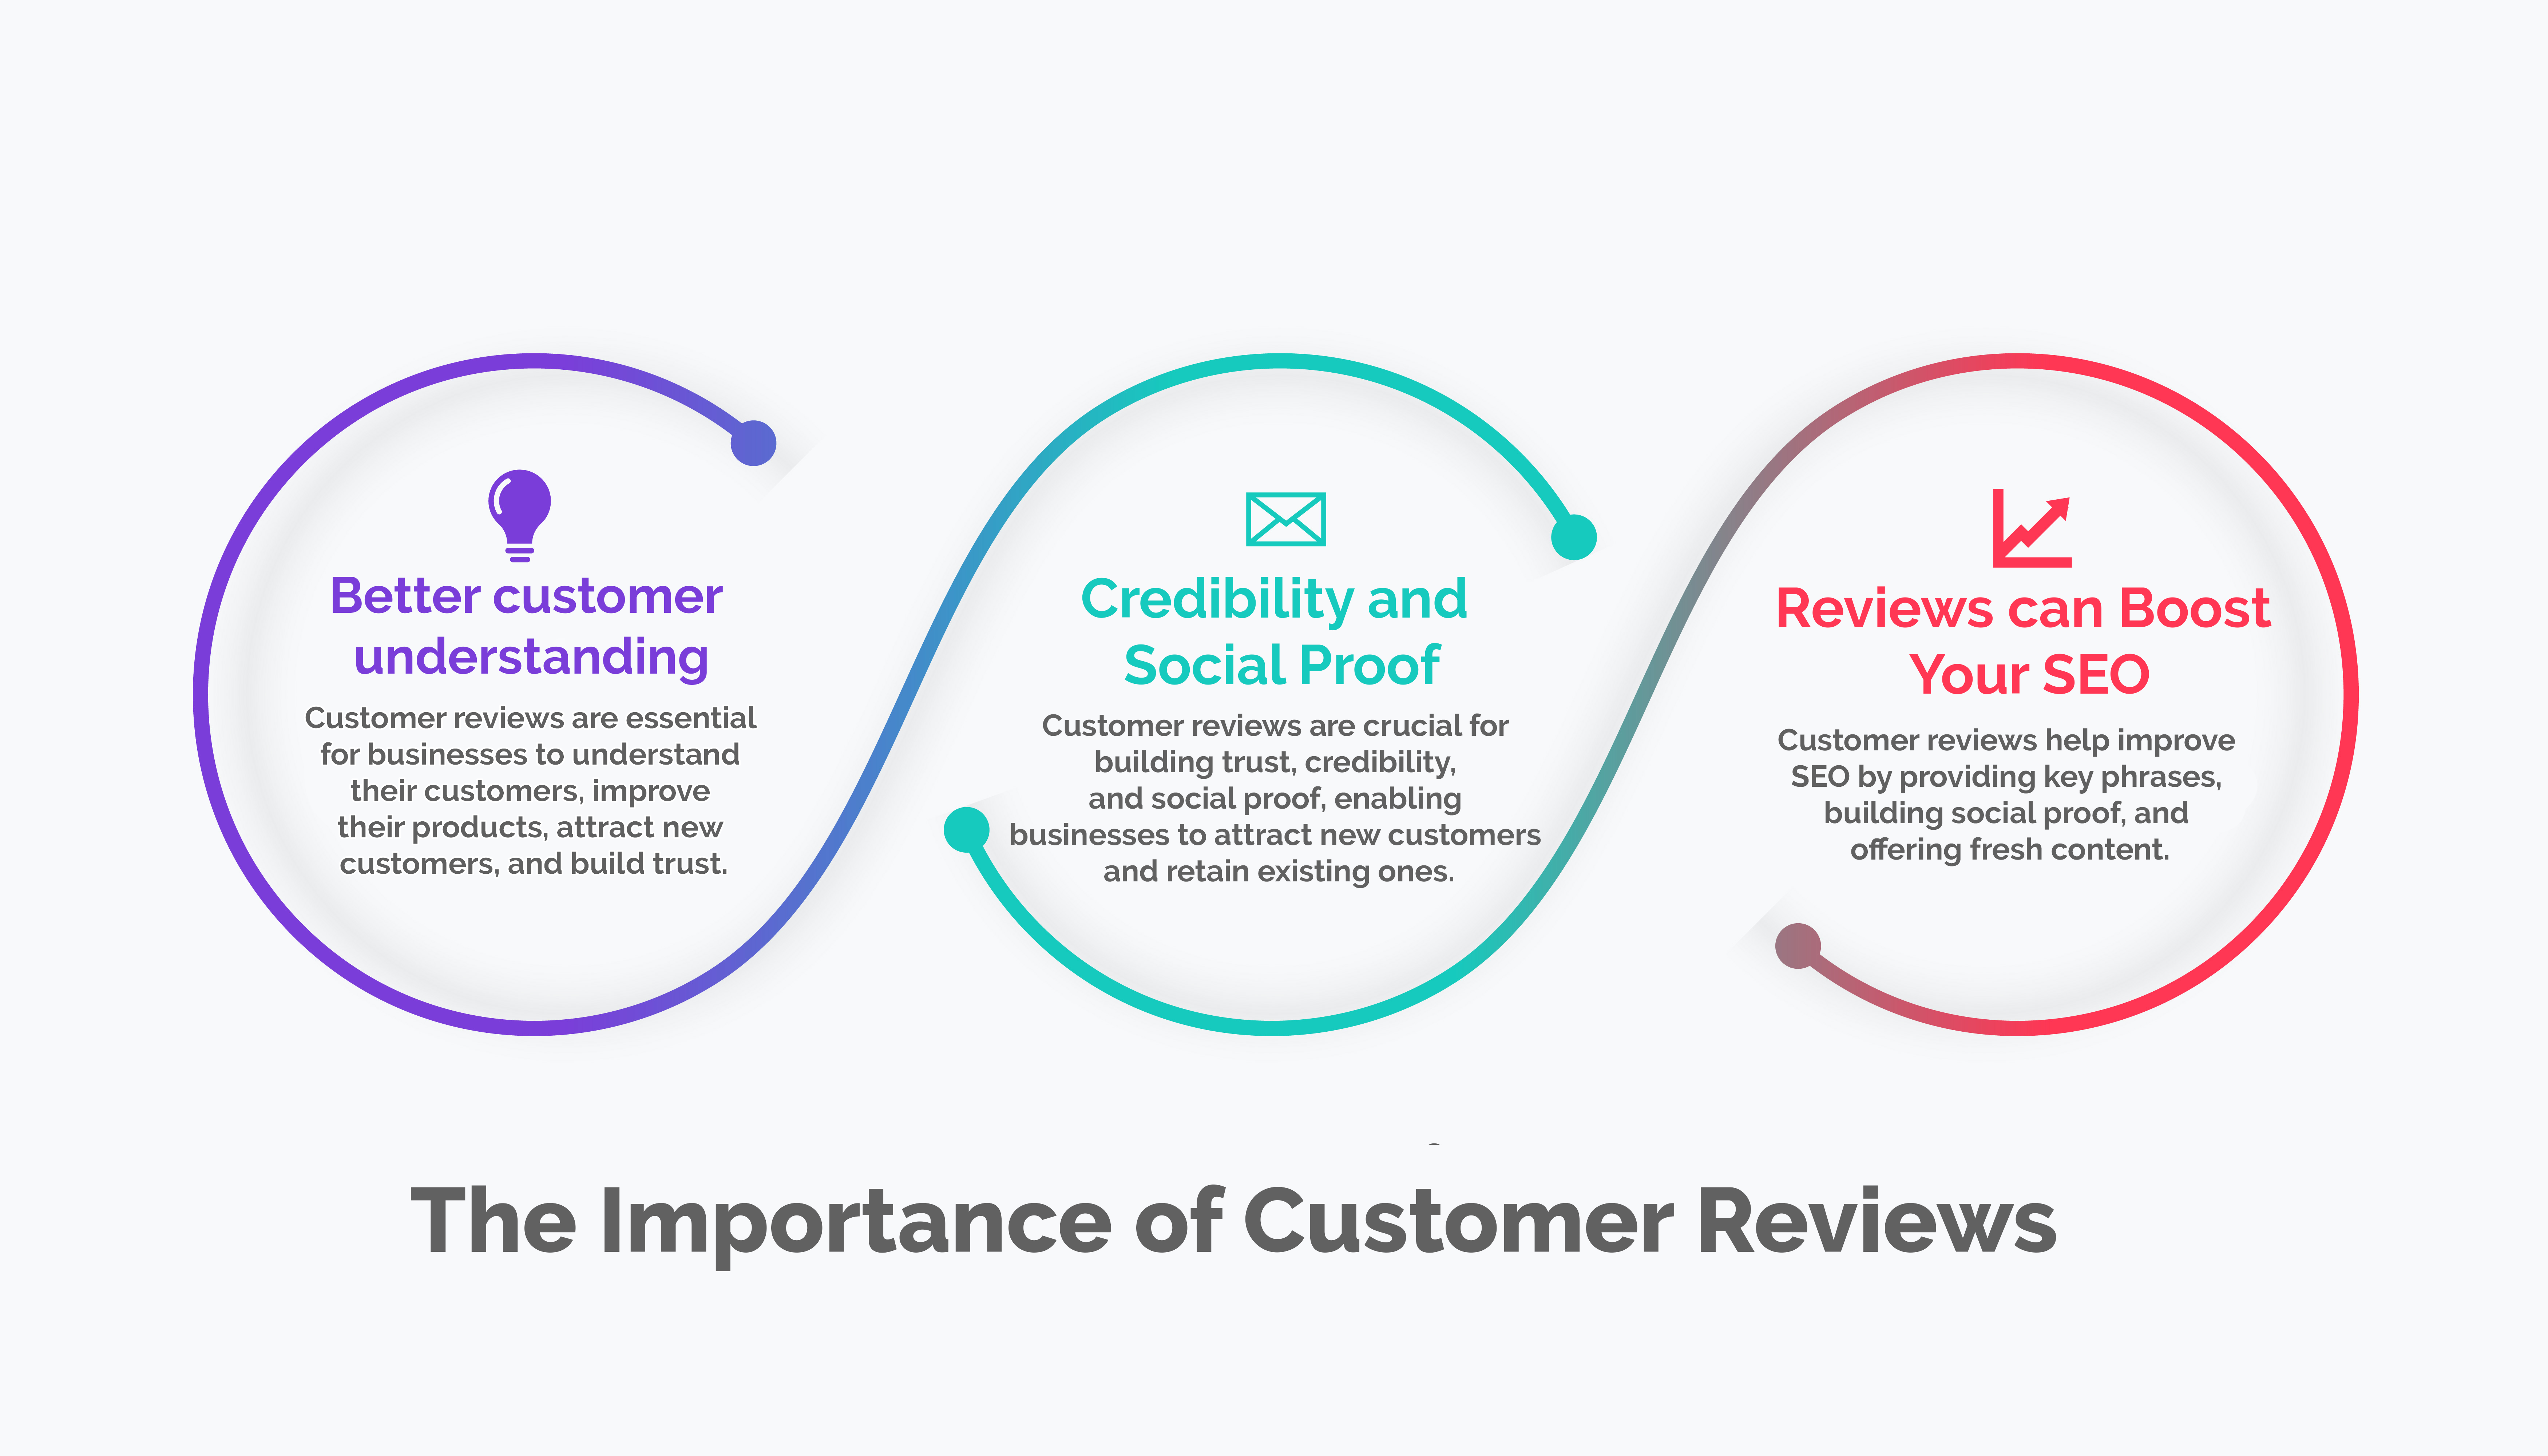 Customer reviews are essential for businesses because they provide valuable feedback, build trust, boost search rankings, and drive traffic.